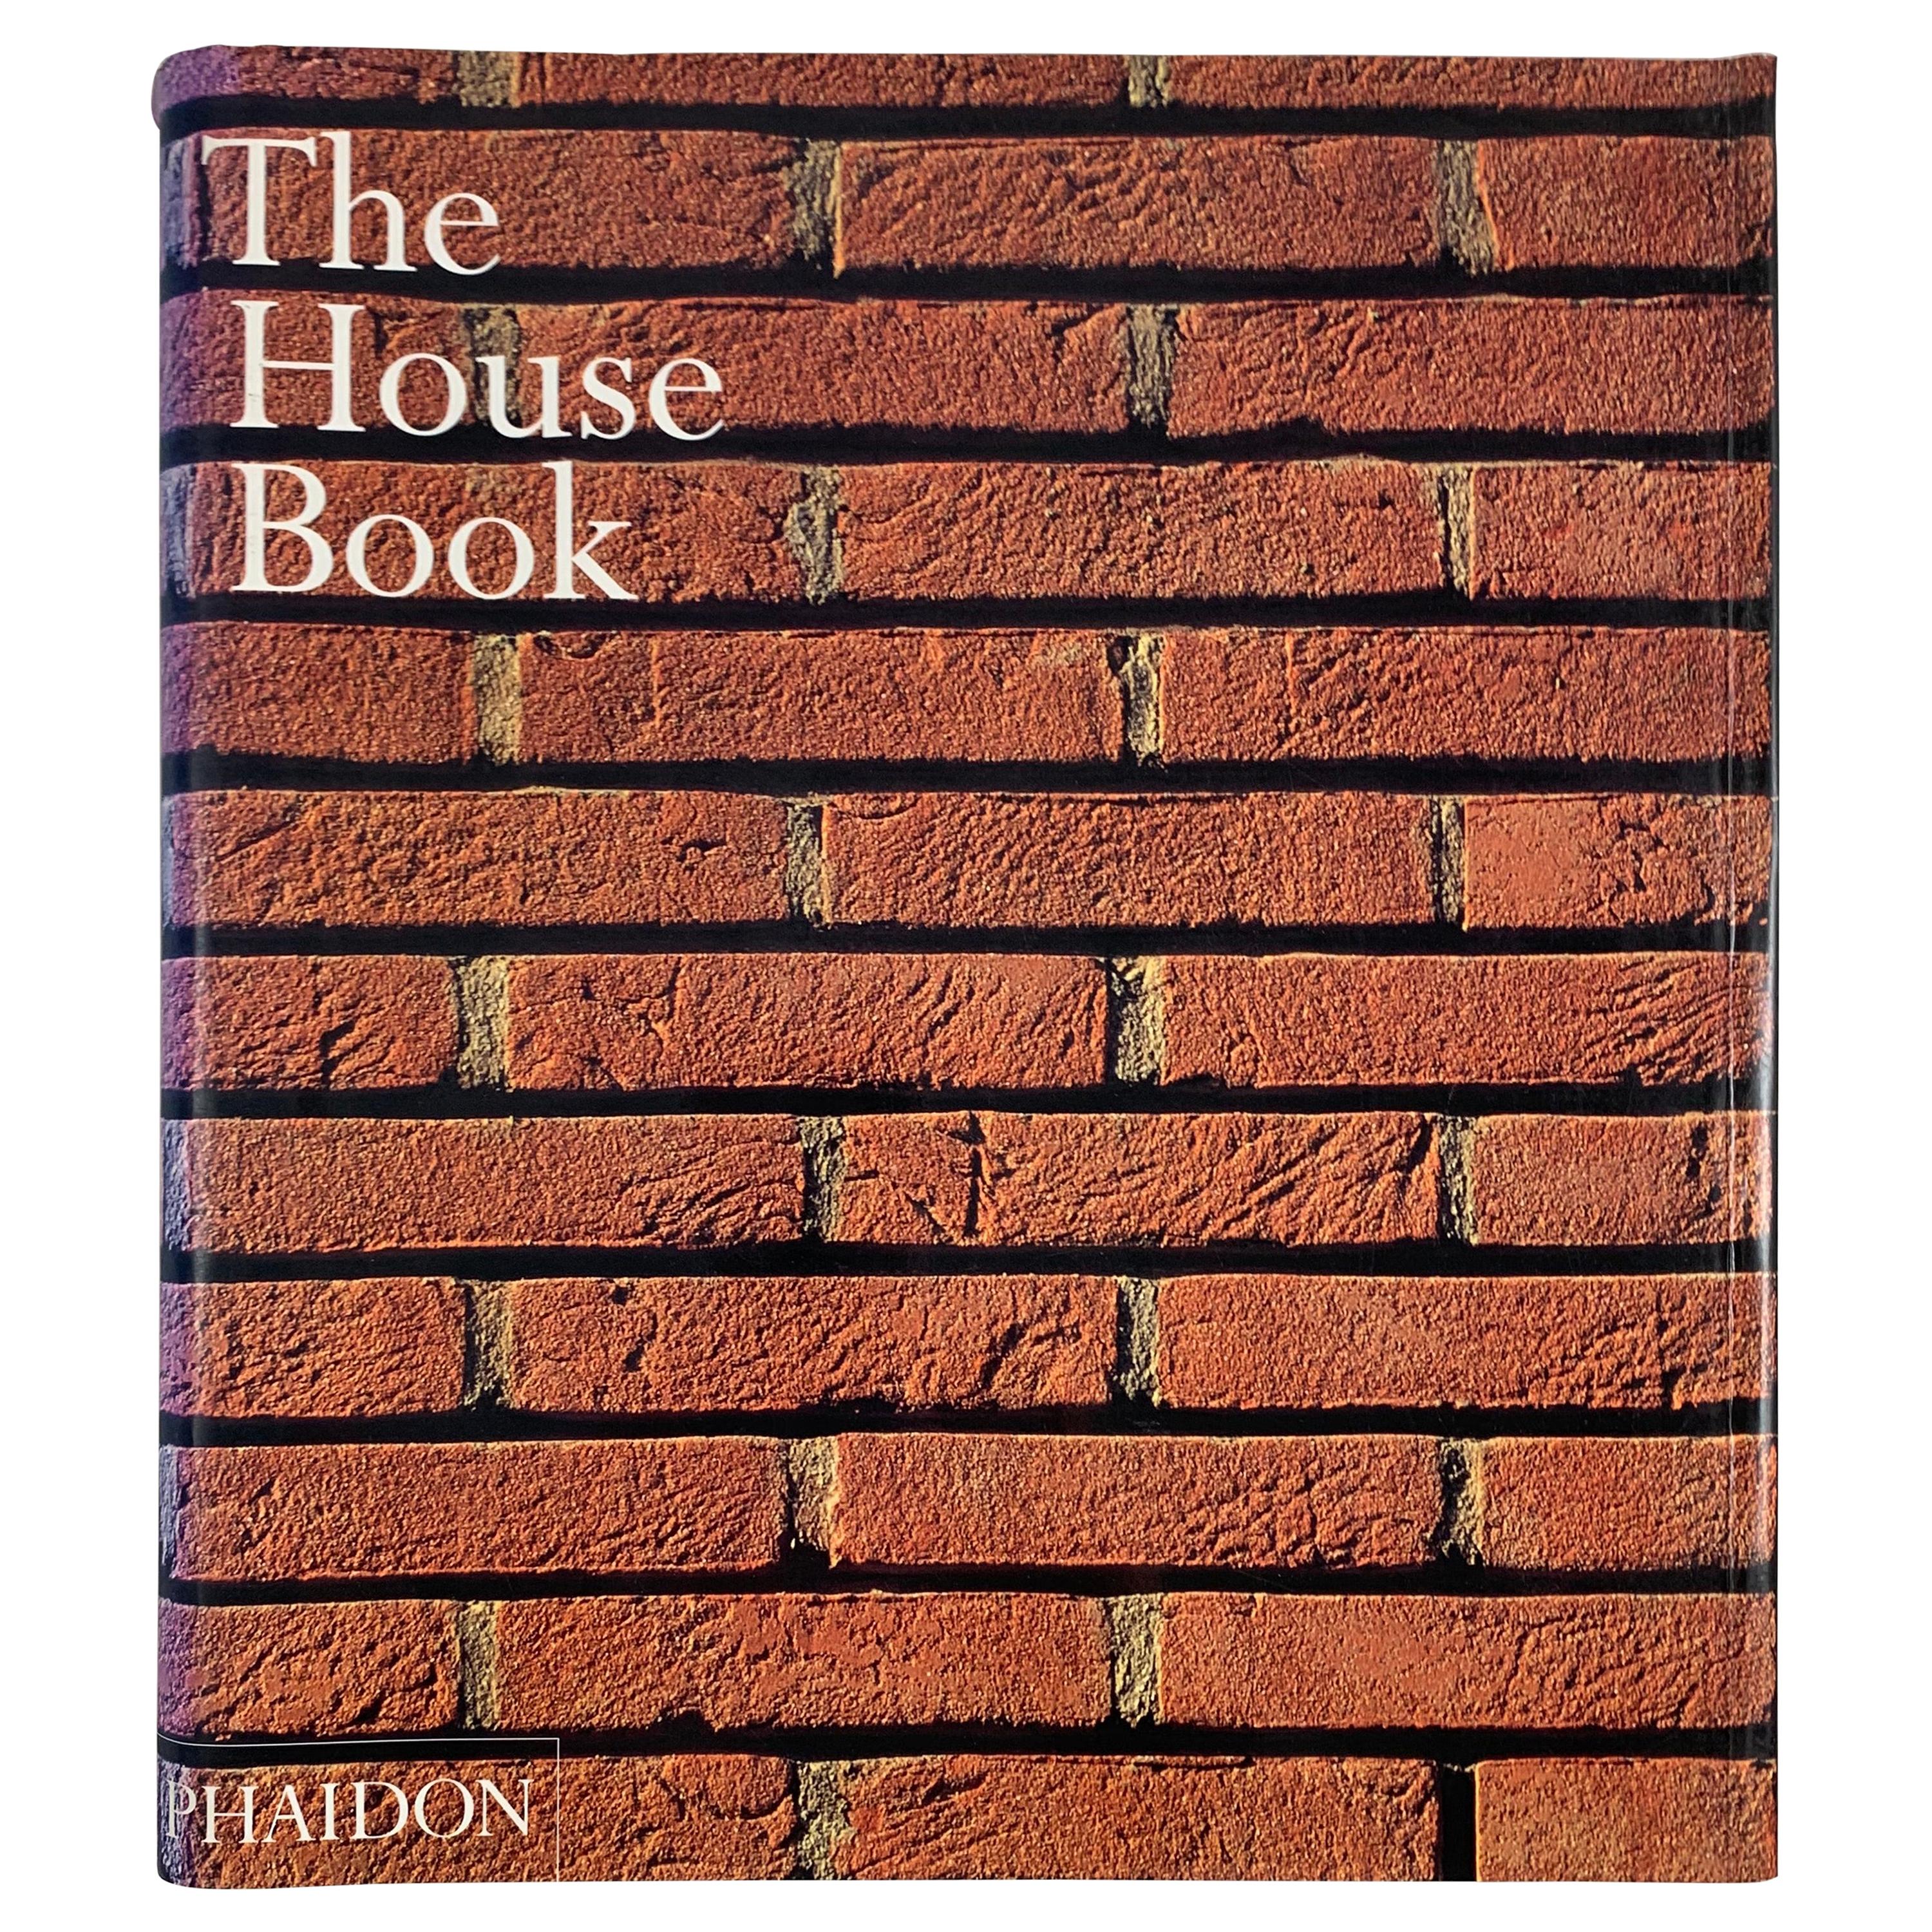 The House Book, Phaidon Press 2001, Coffee Table Architecture and Design Book